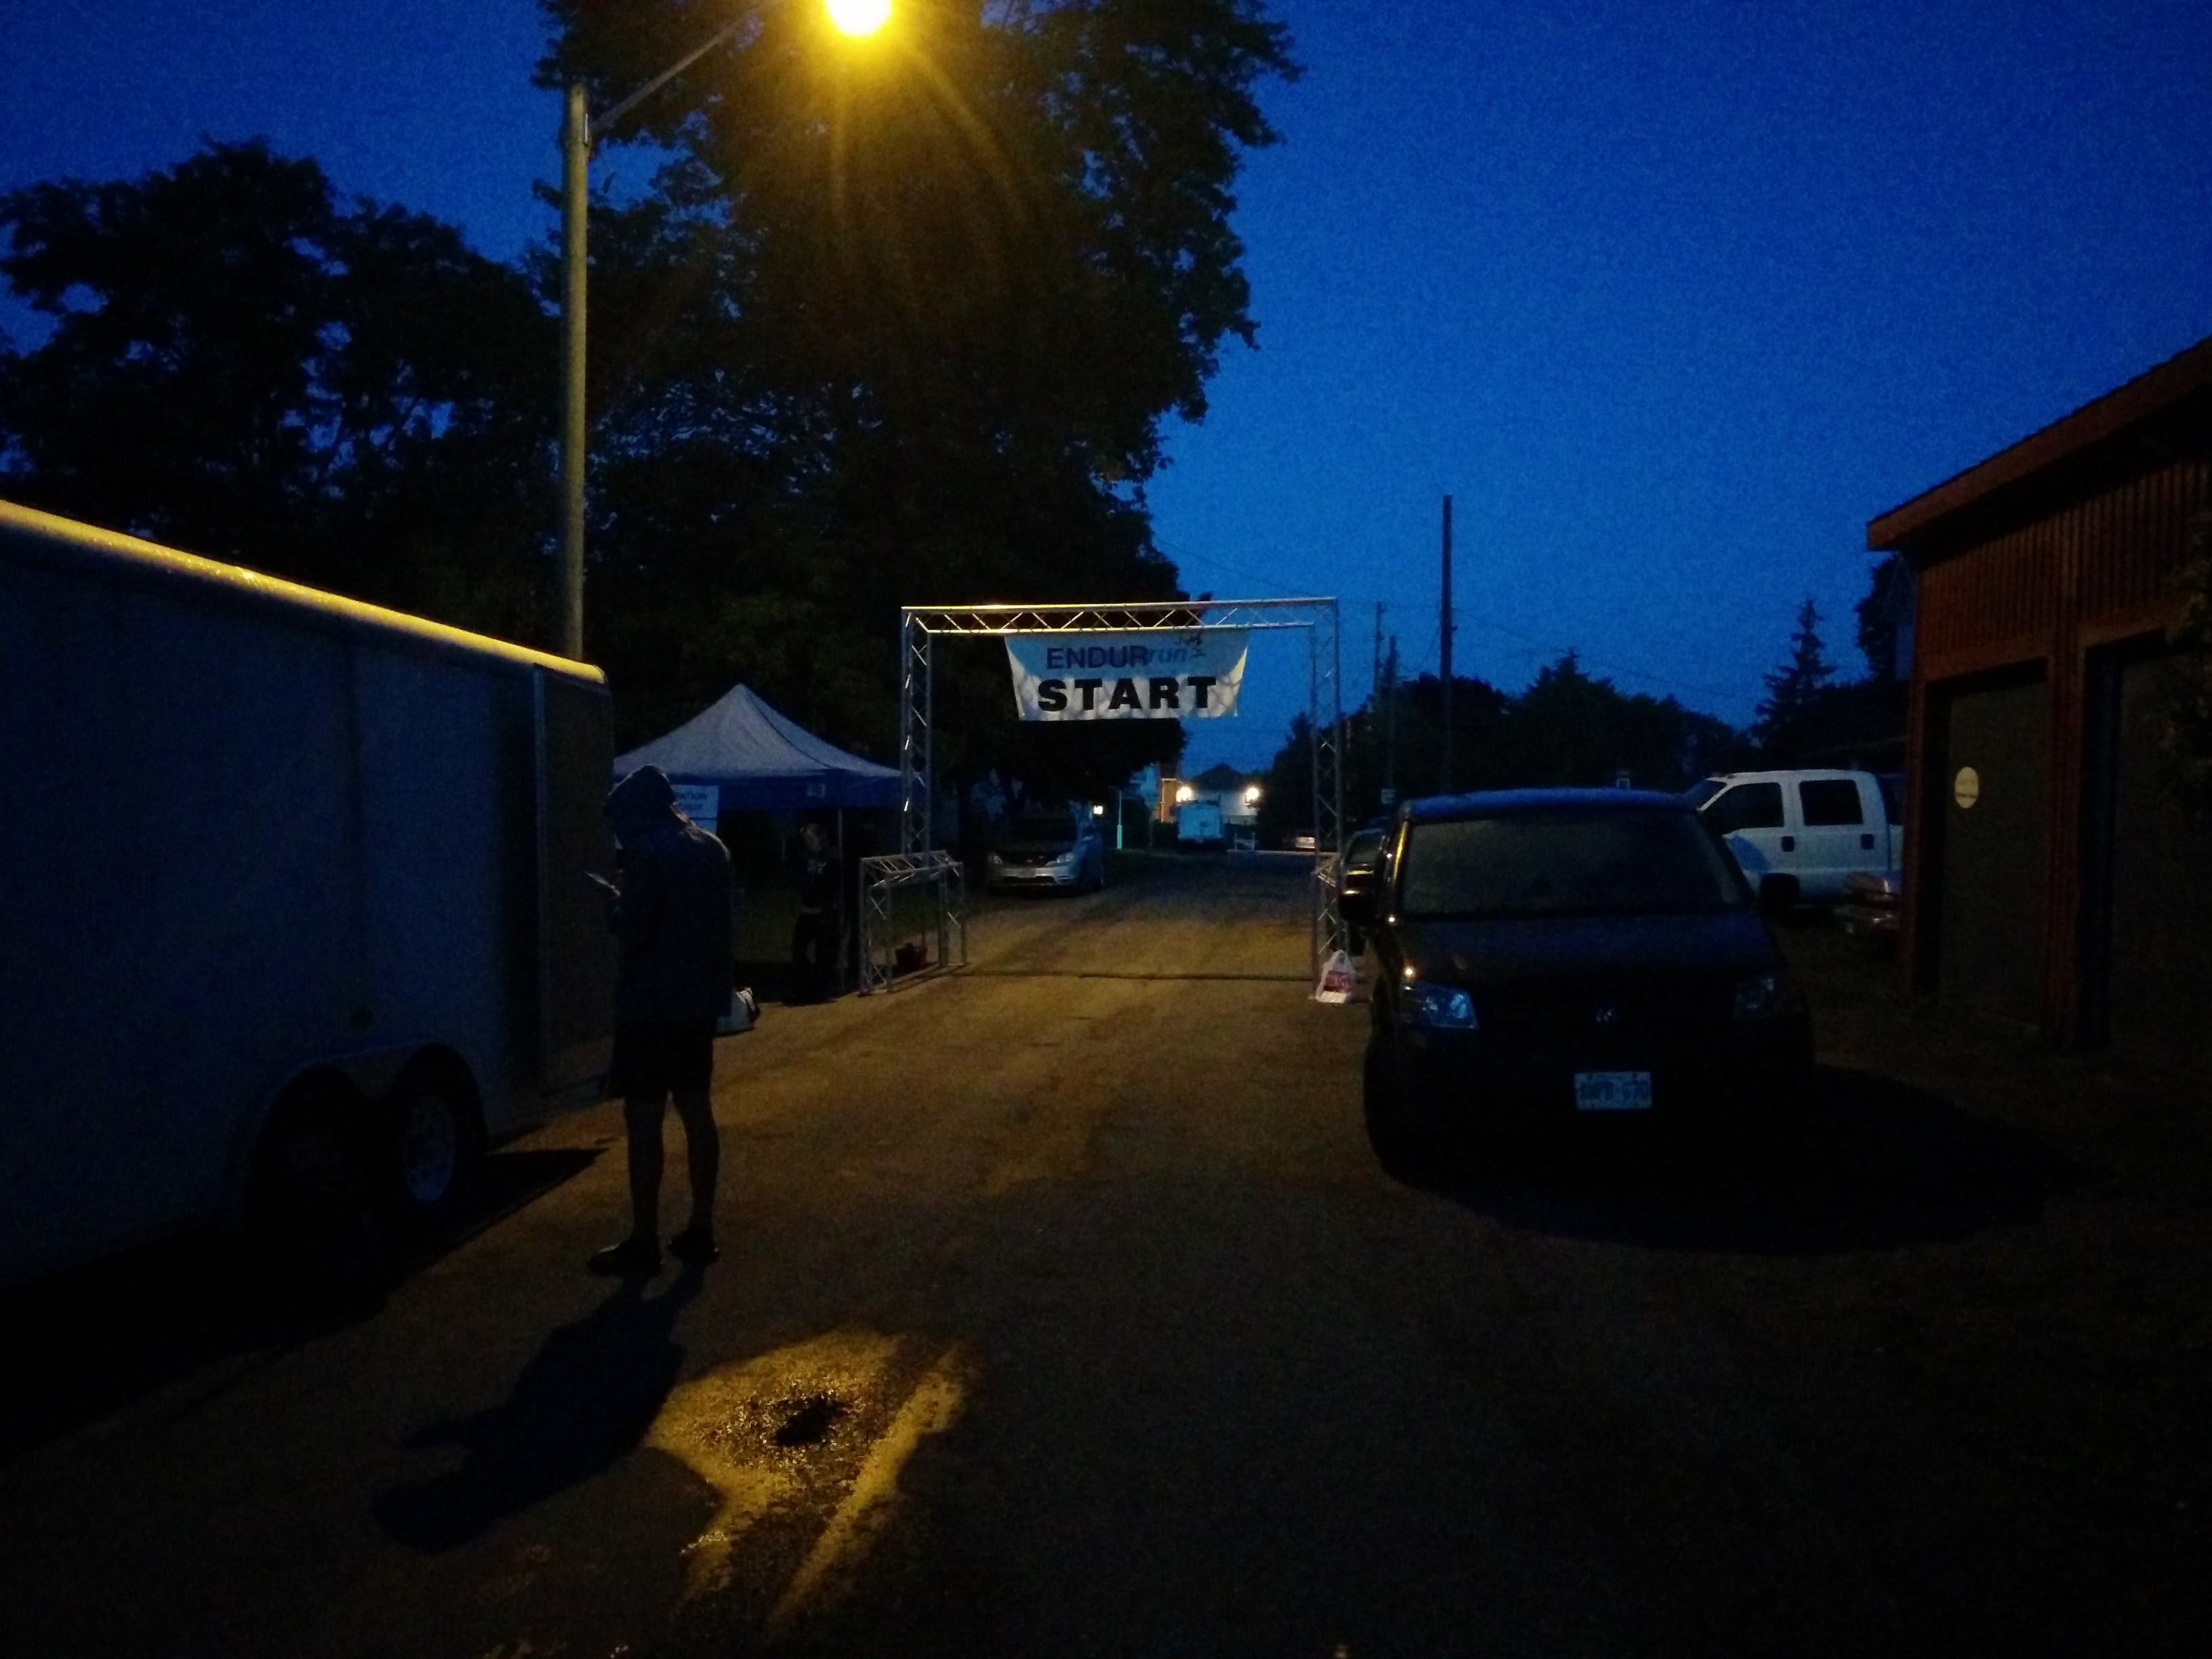 The start line at 6:30am